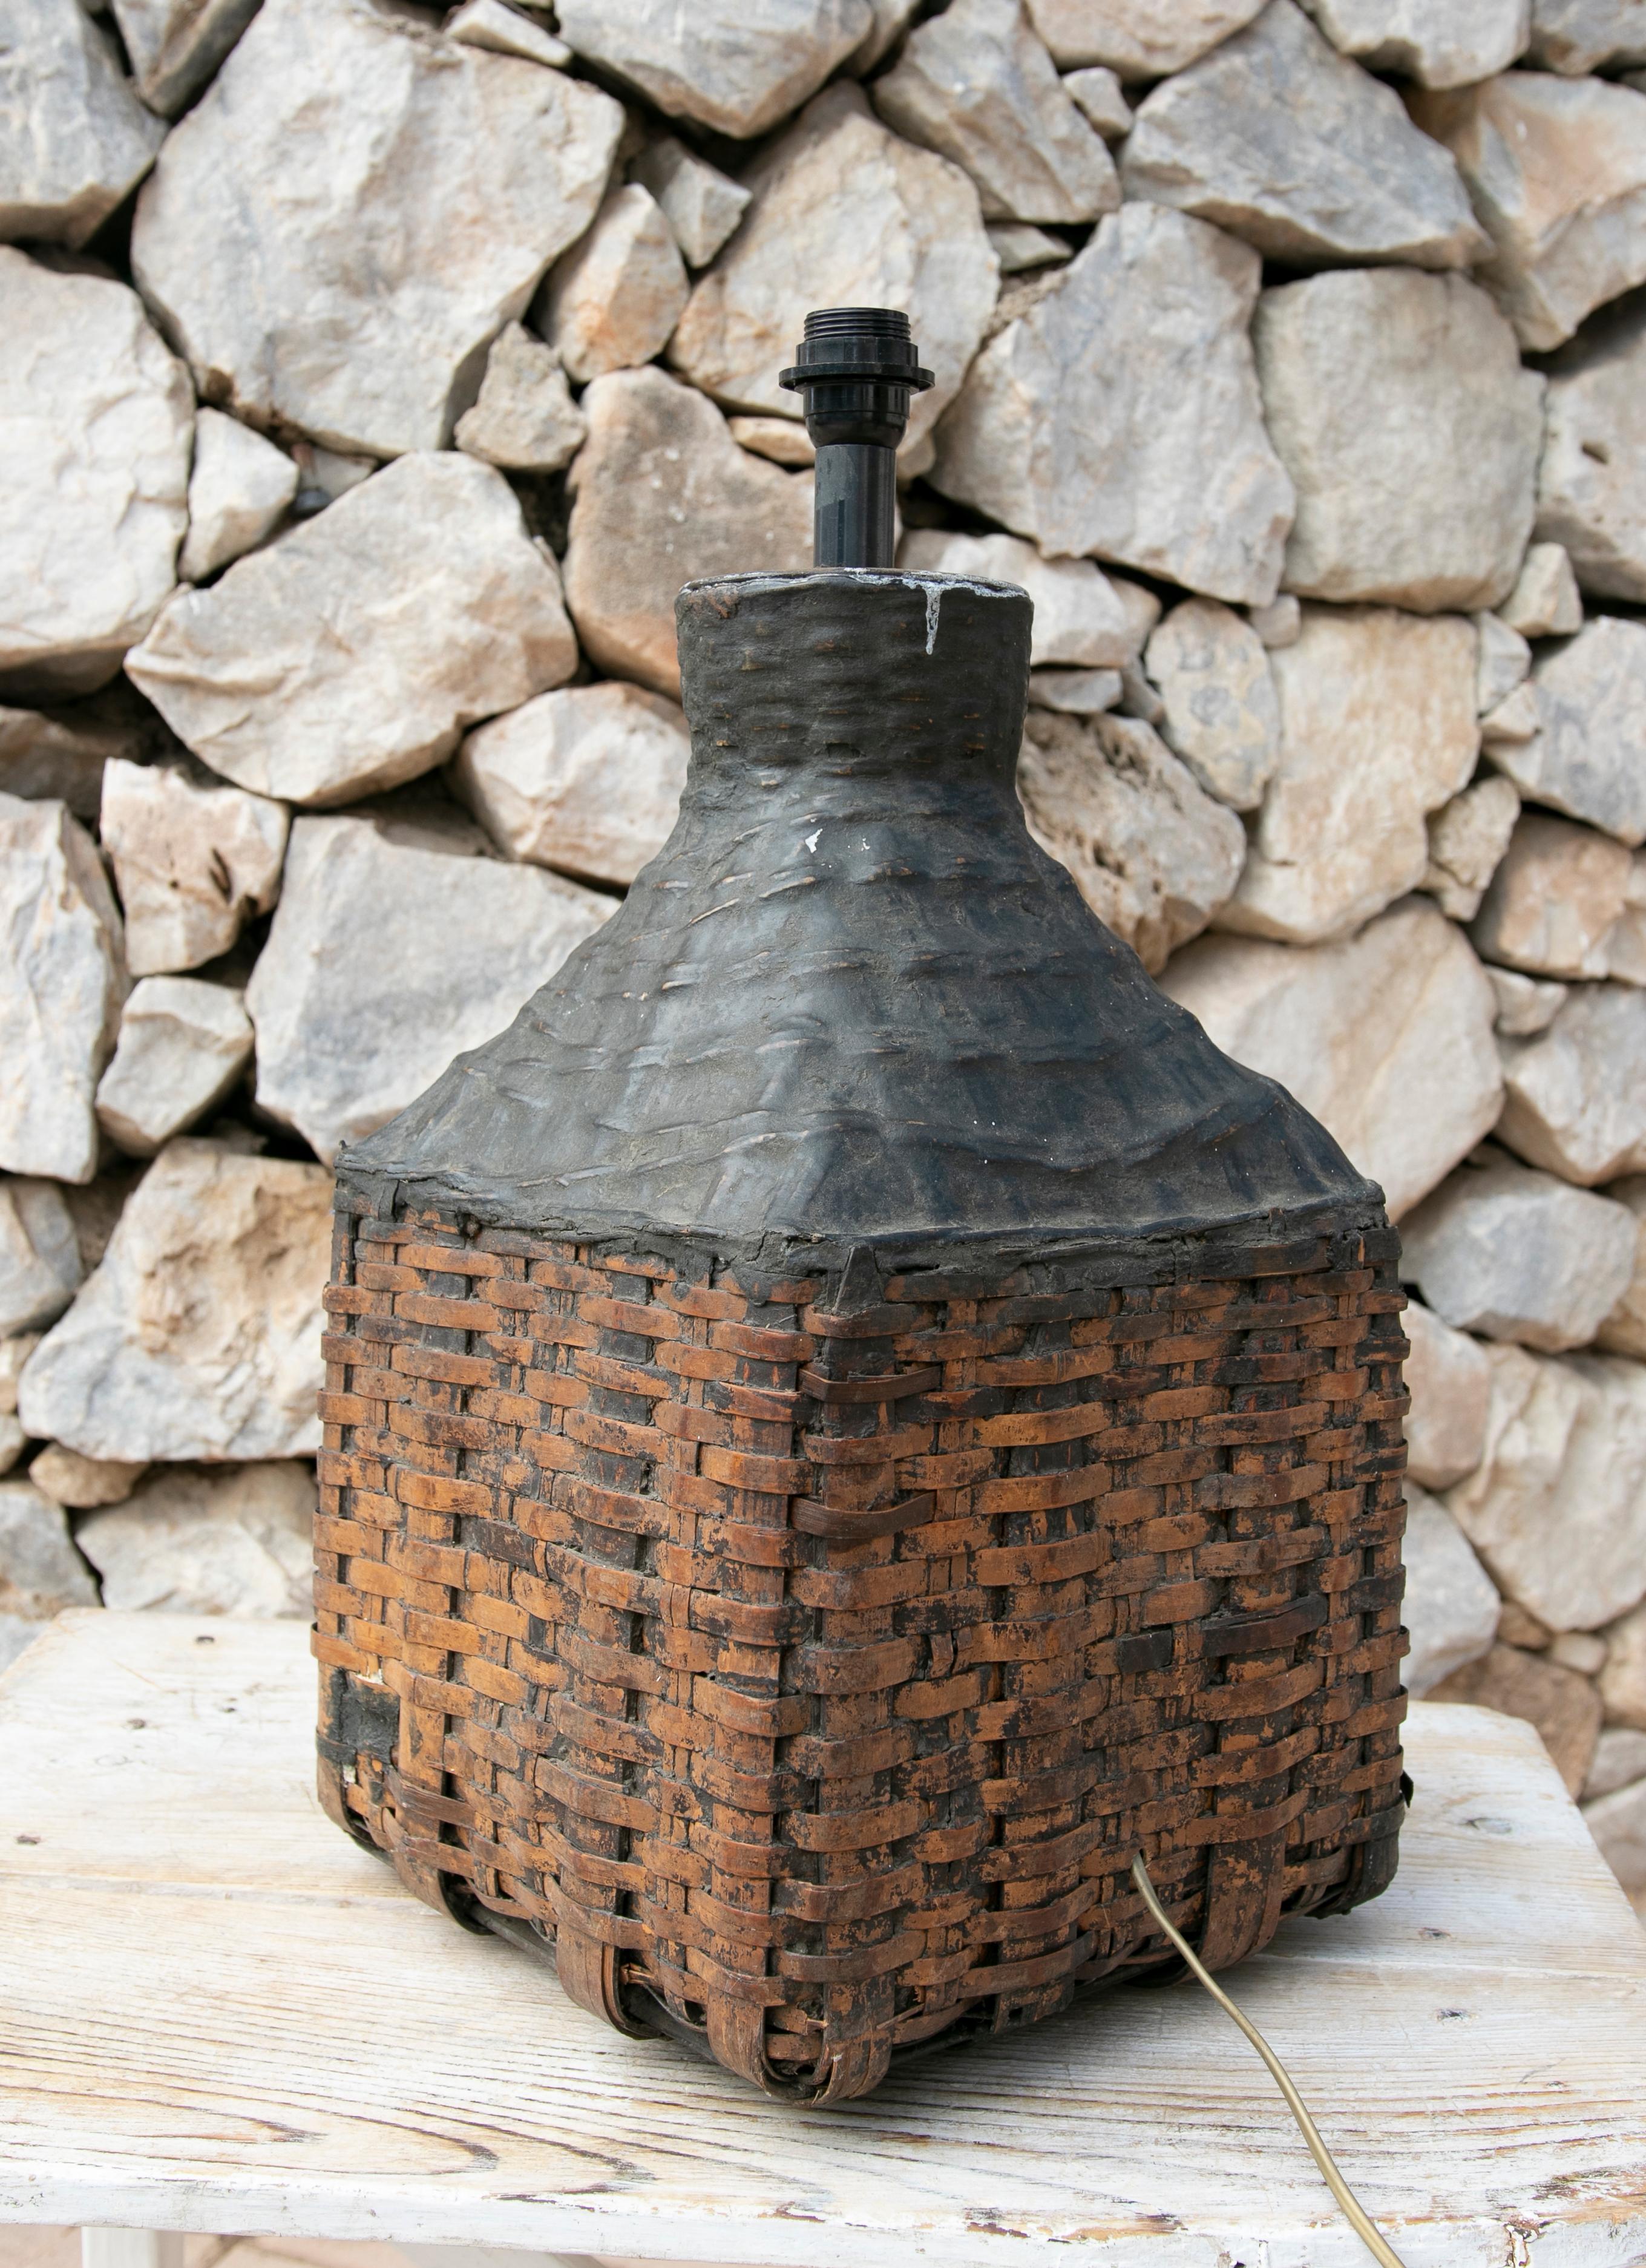 Asian Wicker Table Lamp with Black Painted Top